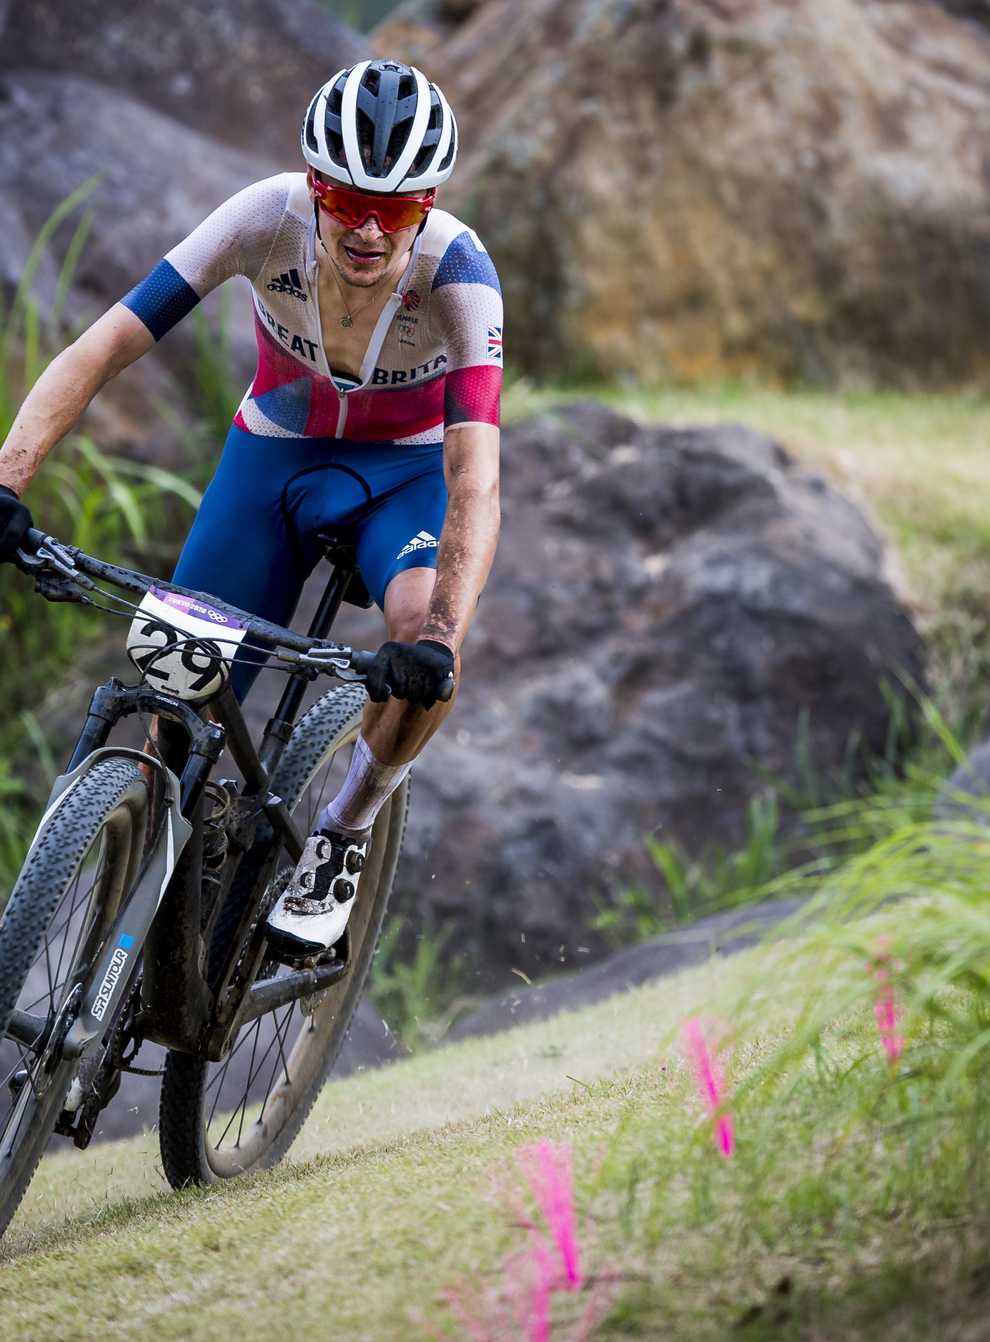 Olympic champion Tom Pidcock has been back on his mountain bike after a spell on the road (Jasper Jacobs/PA)